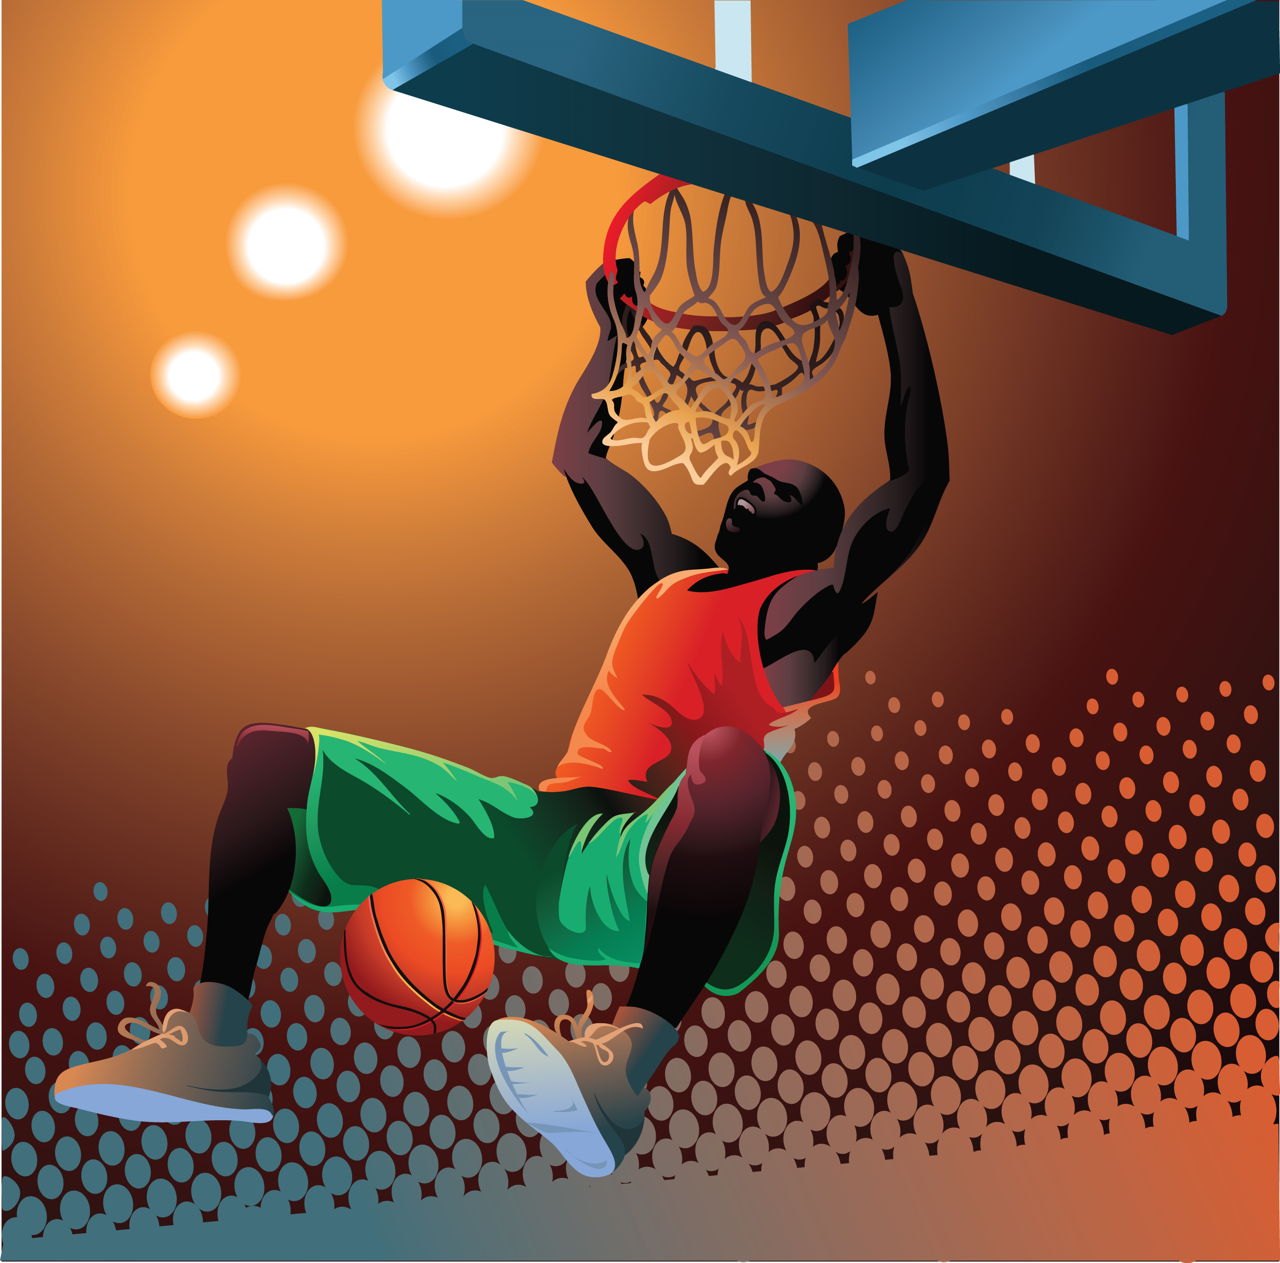 Best Basketball Movies for Kids